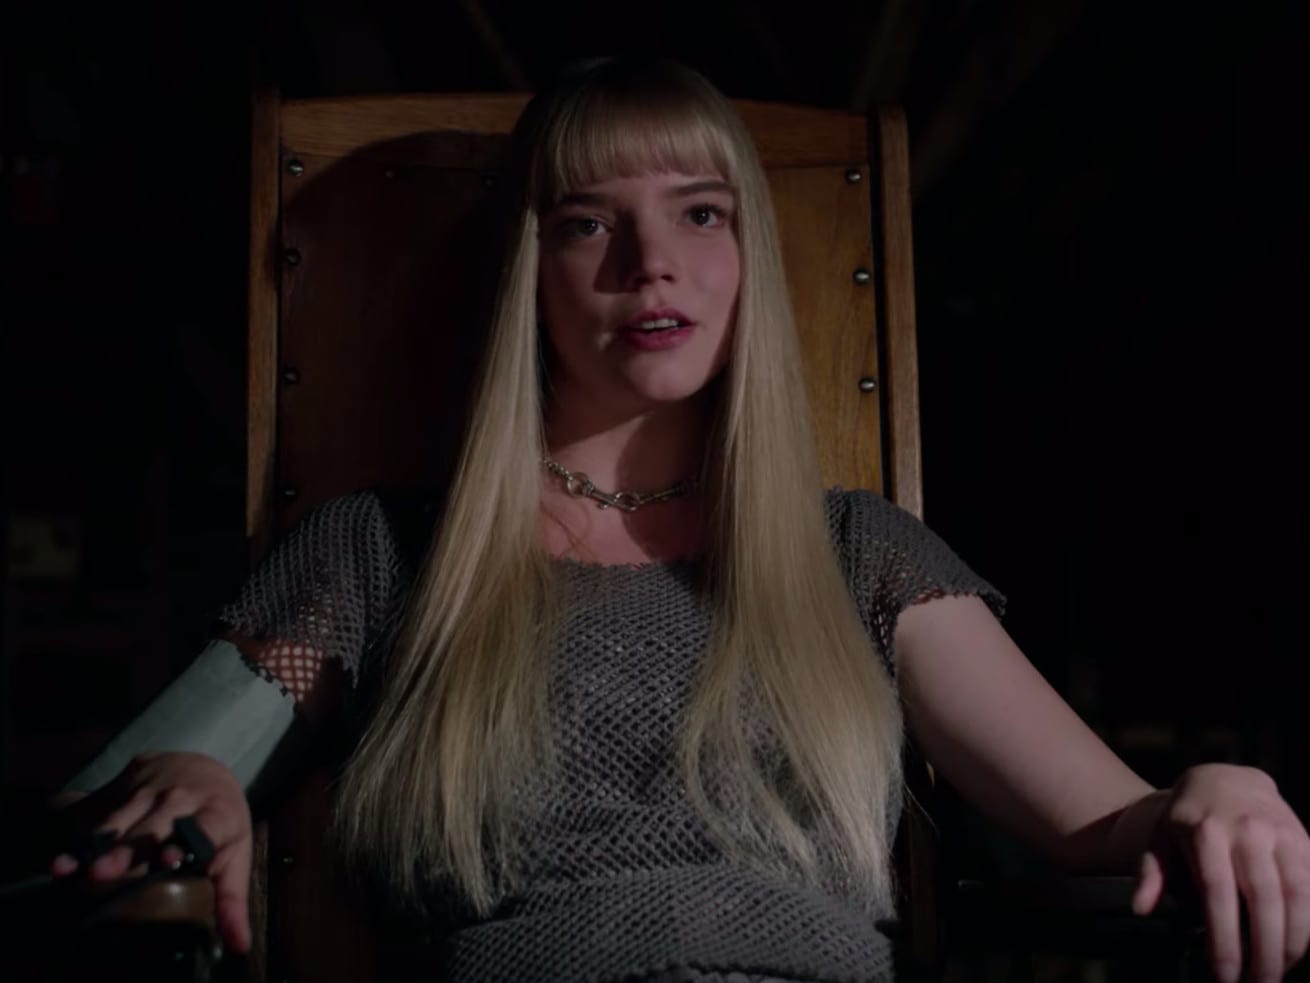 The long-lost trailer for New Mutants, the highly anticipated X-Men spinoff, is finally here